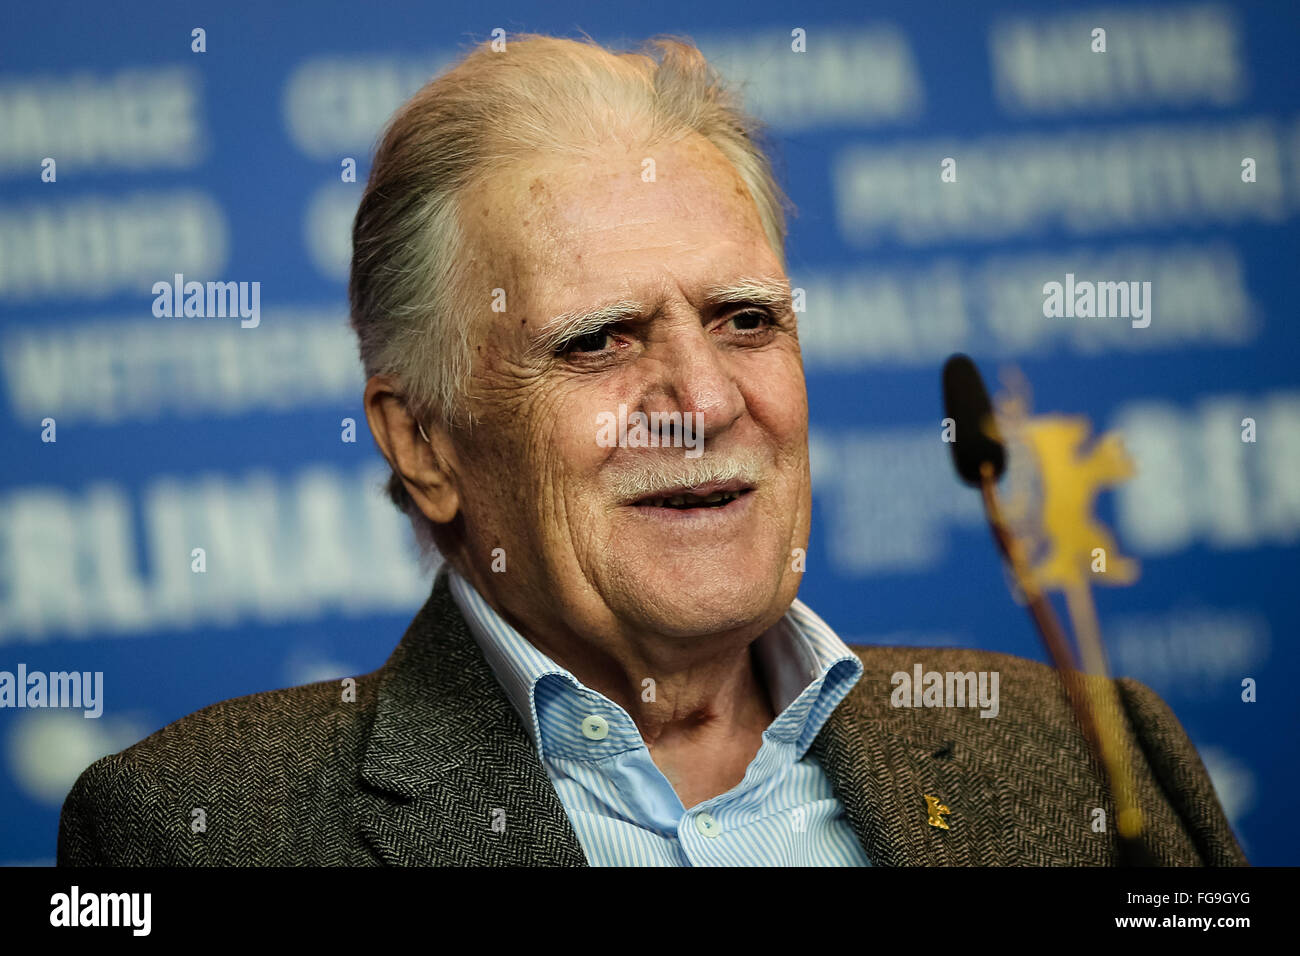 Berlin, Germany. 18th Feb, 2016. German cinematographer Michael Ballhaus attends a press conference to present him as the laureate of the Honorary Golden Bear Award at the 66th Berlinale International Film Festival in Berlin, Germany, on Feb. 18, 2016. © Zhang Fan/Xinhua/Alamy Live News Stock Photo